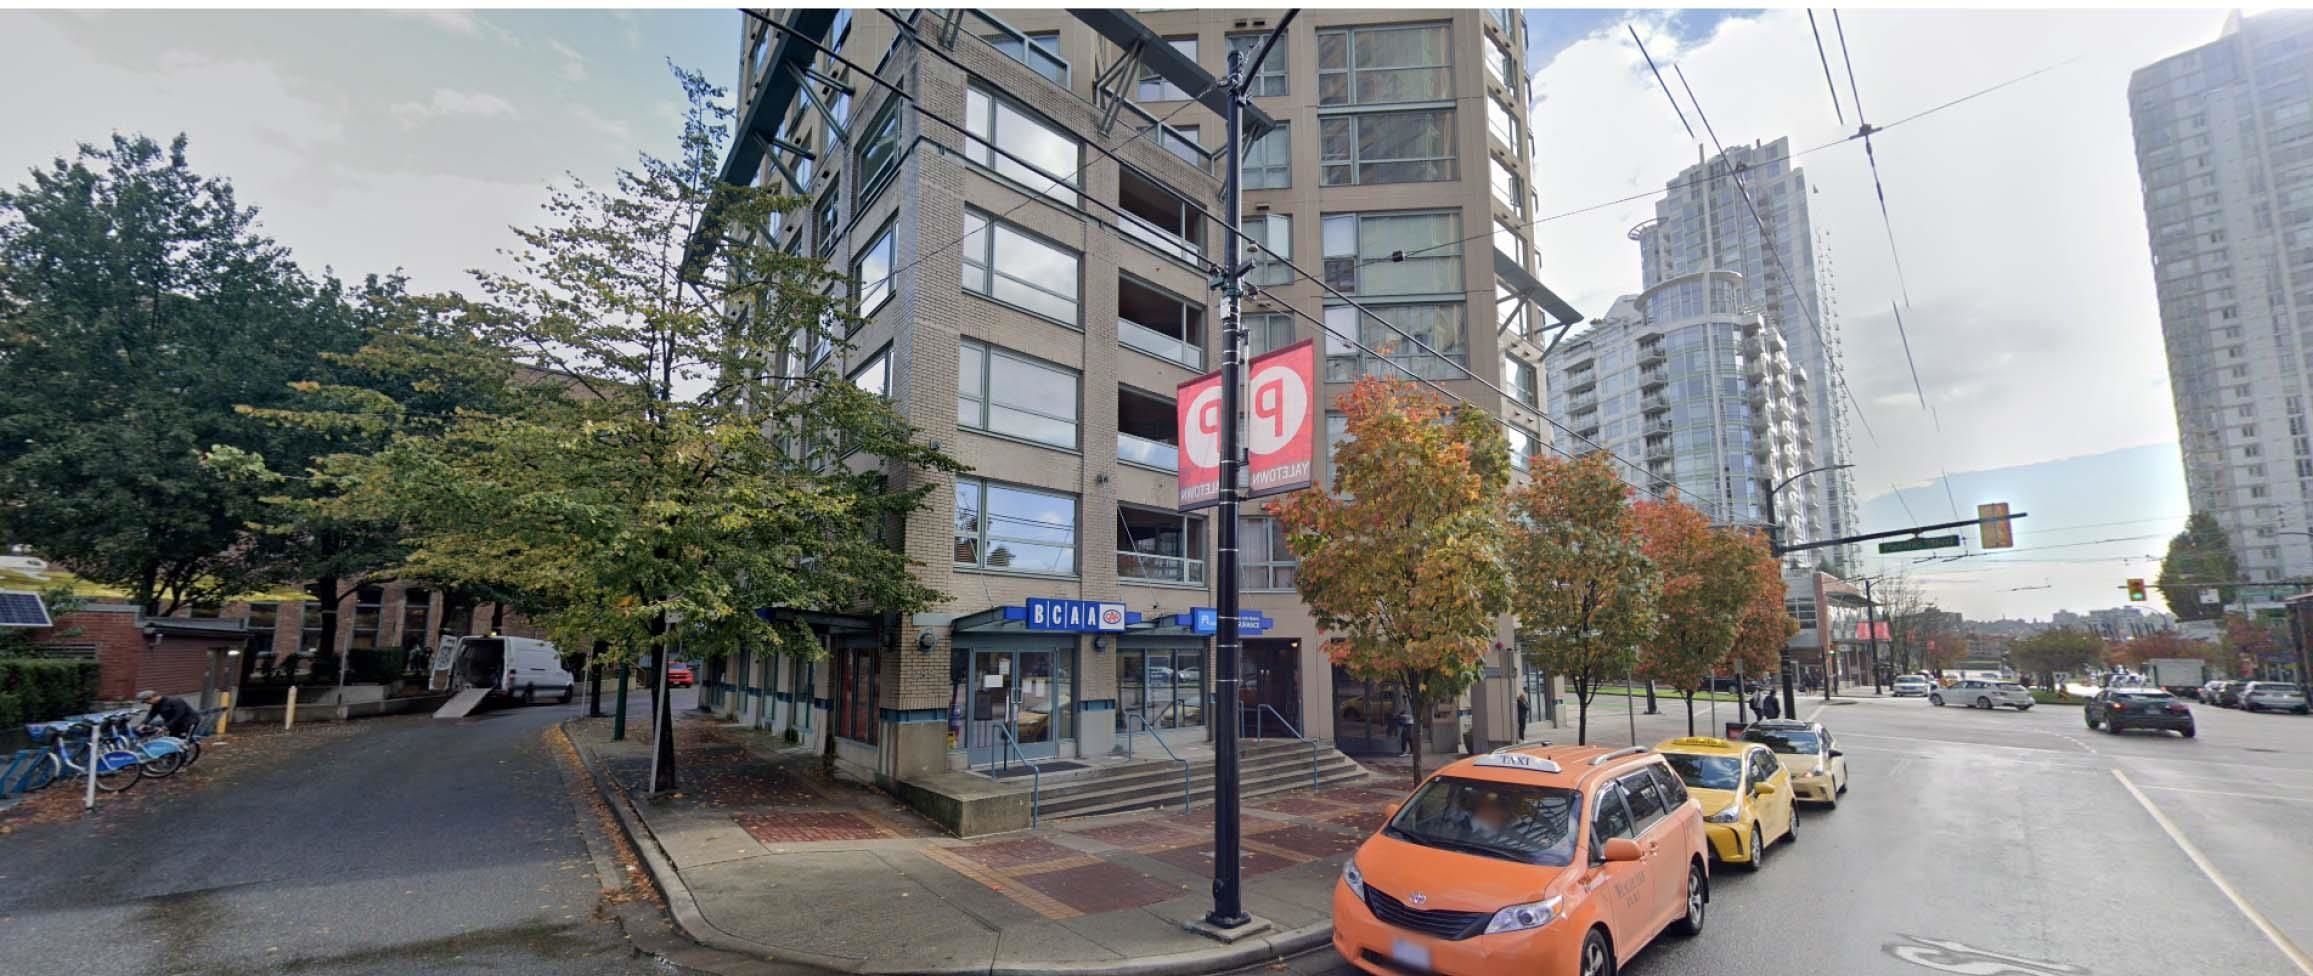 Main Photo: 289 DAVIE Street in Vancouver: Yaletown Office for sale (Vancouver West)  : MLS®# C8041596